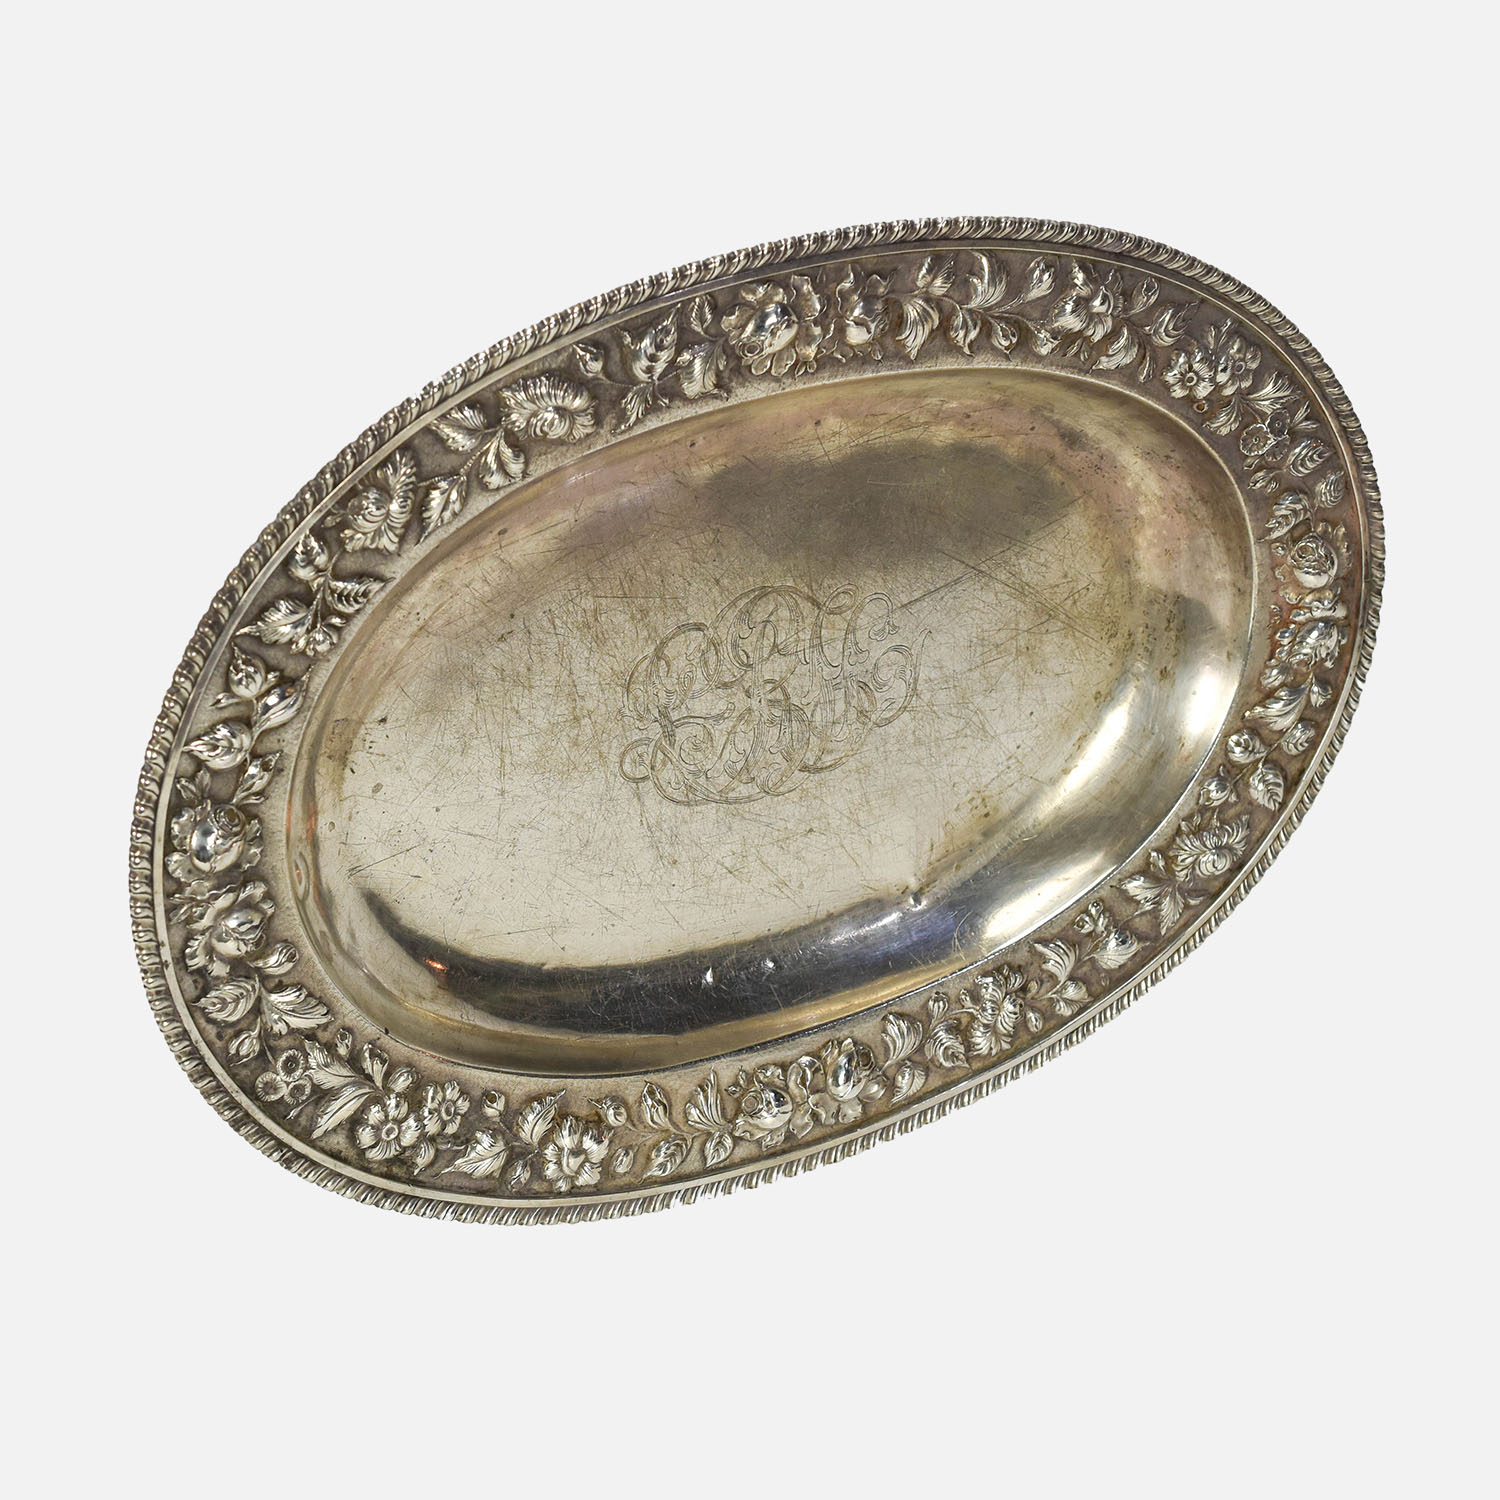 Jacobi & Co Baltimore Sterling Repousse Tray